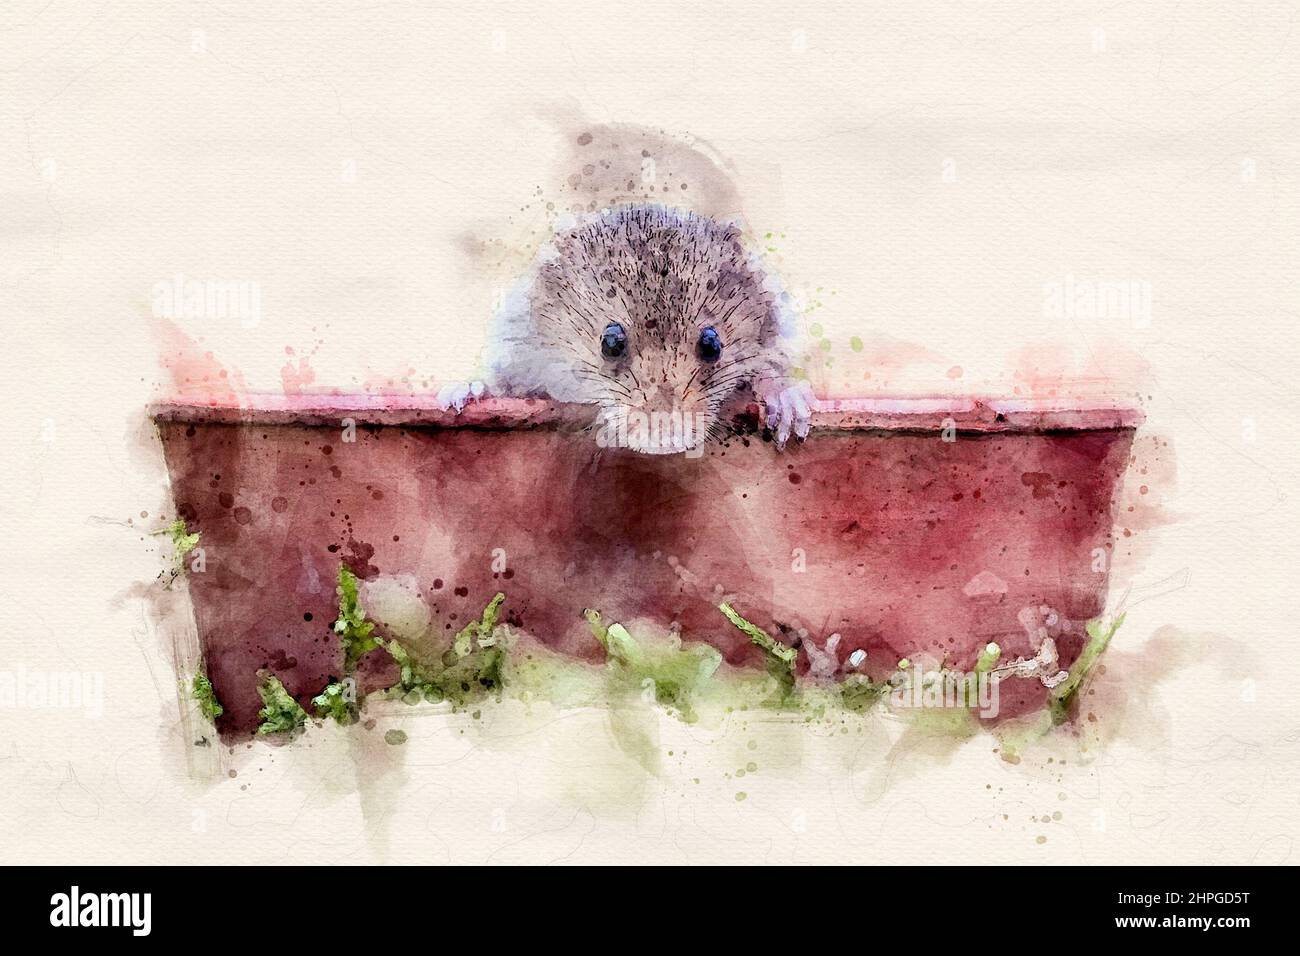 Watercolour effect of a harvest mouse peeping out from inside a plant pot Stock Photo